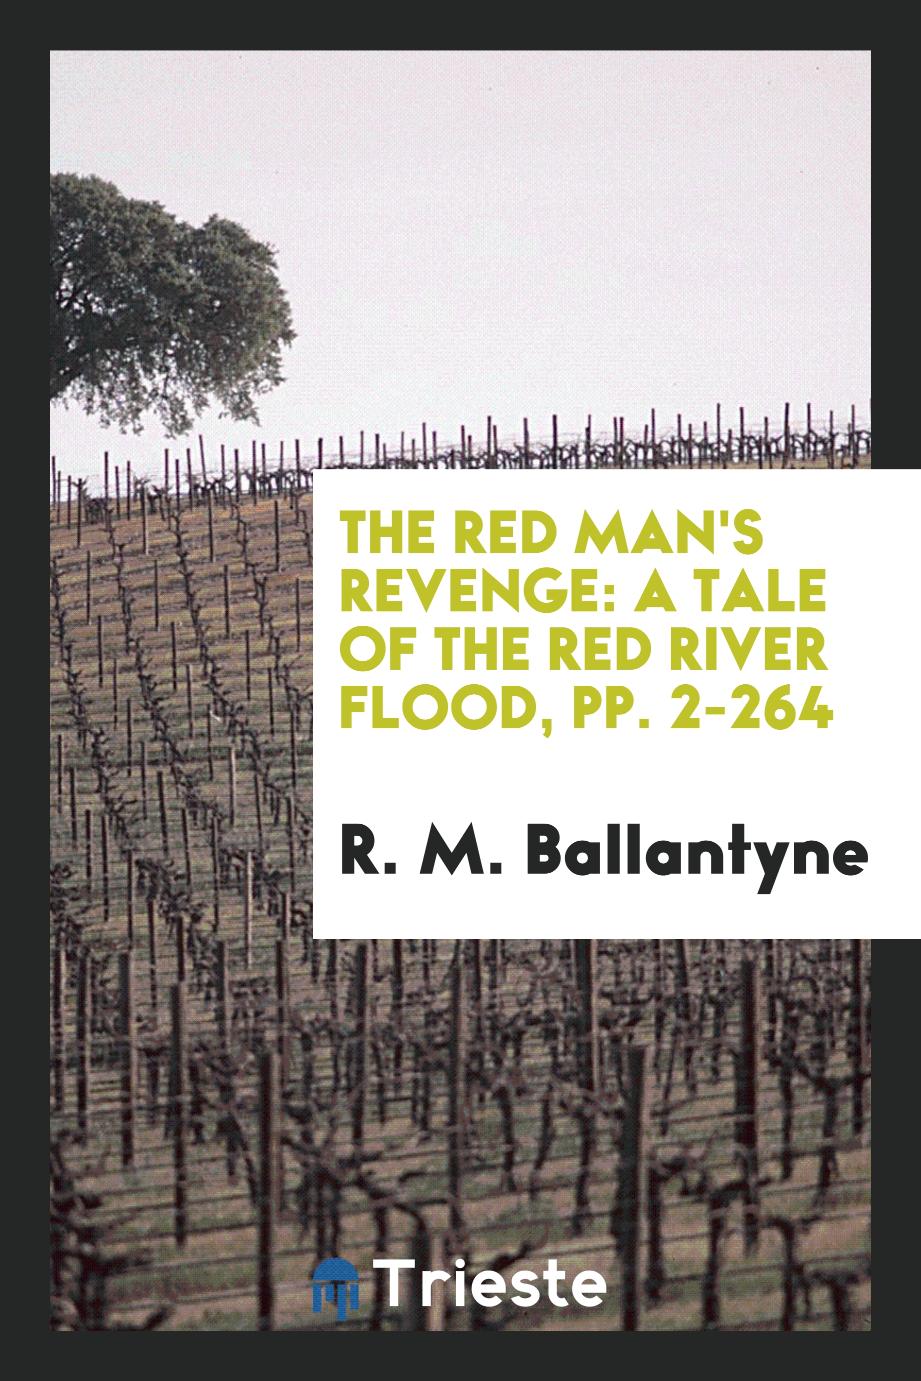 The Red Man's Revenge: A Tale of The Red River Flood, pp. 2-264